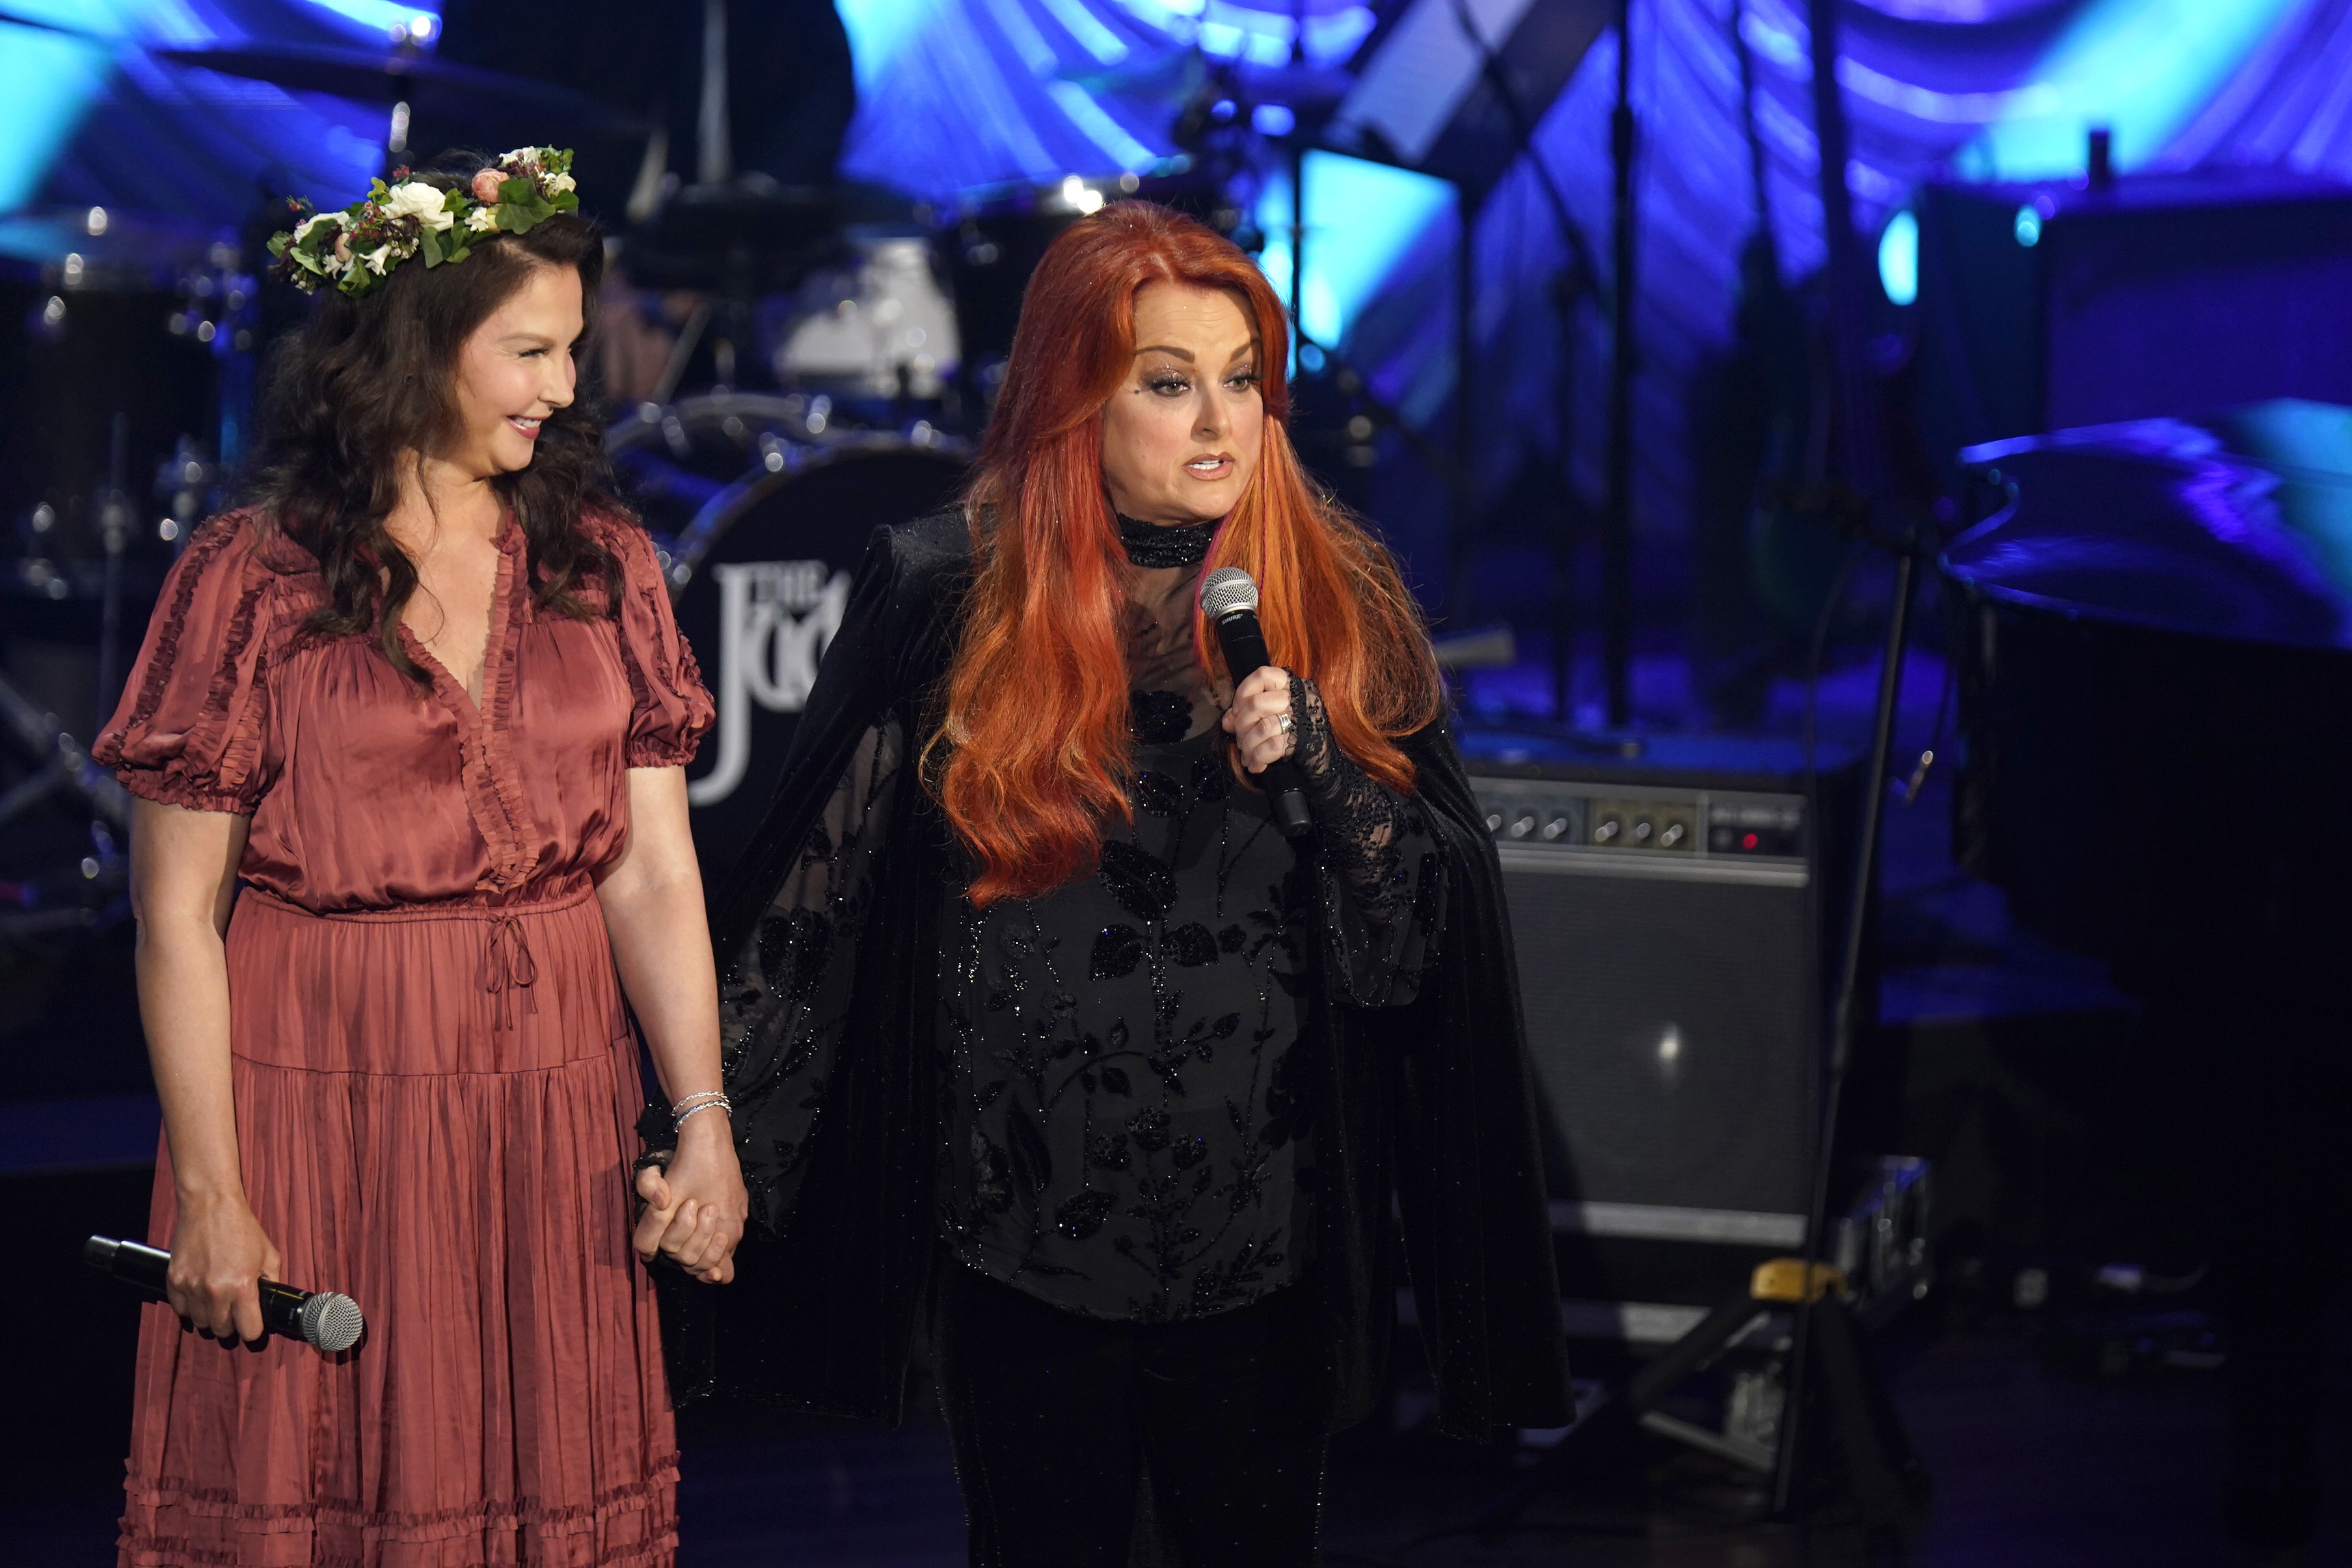 Ashley and Wynonna Judd at Naomi Judd: 'A River Of Time' Celebration in Nashville on May 15, 2022 | Source: Getty Images